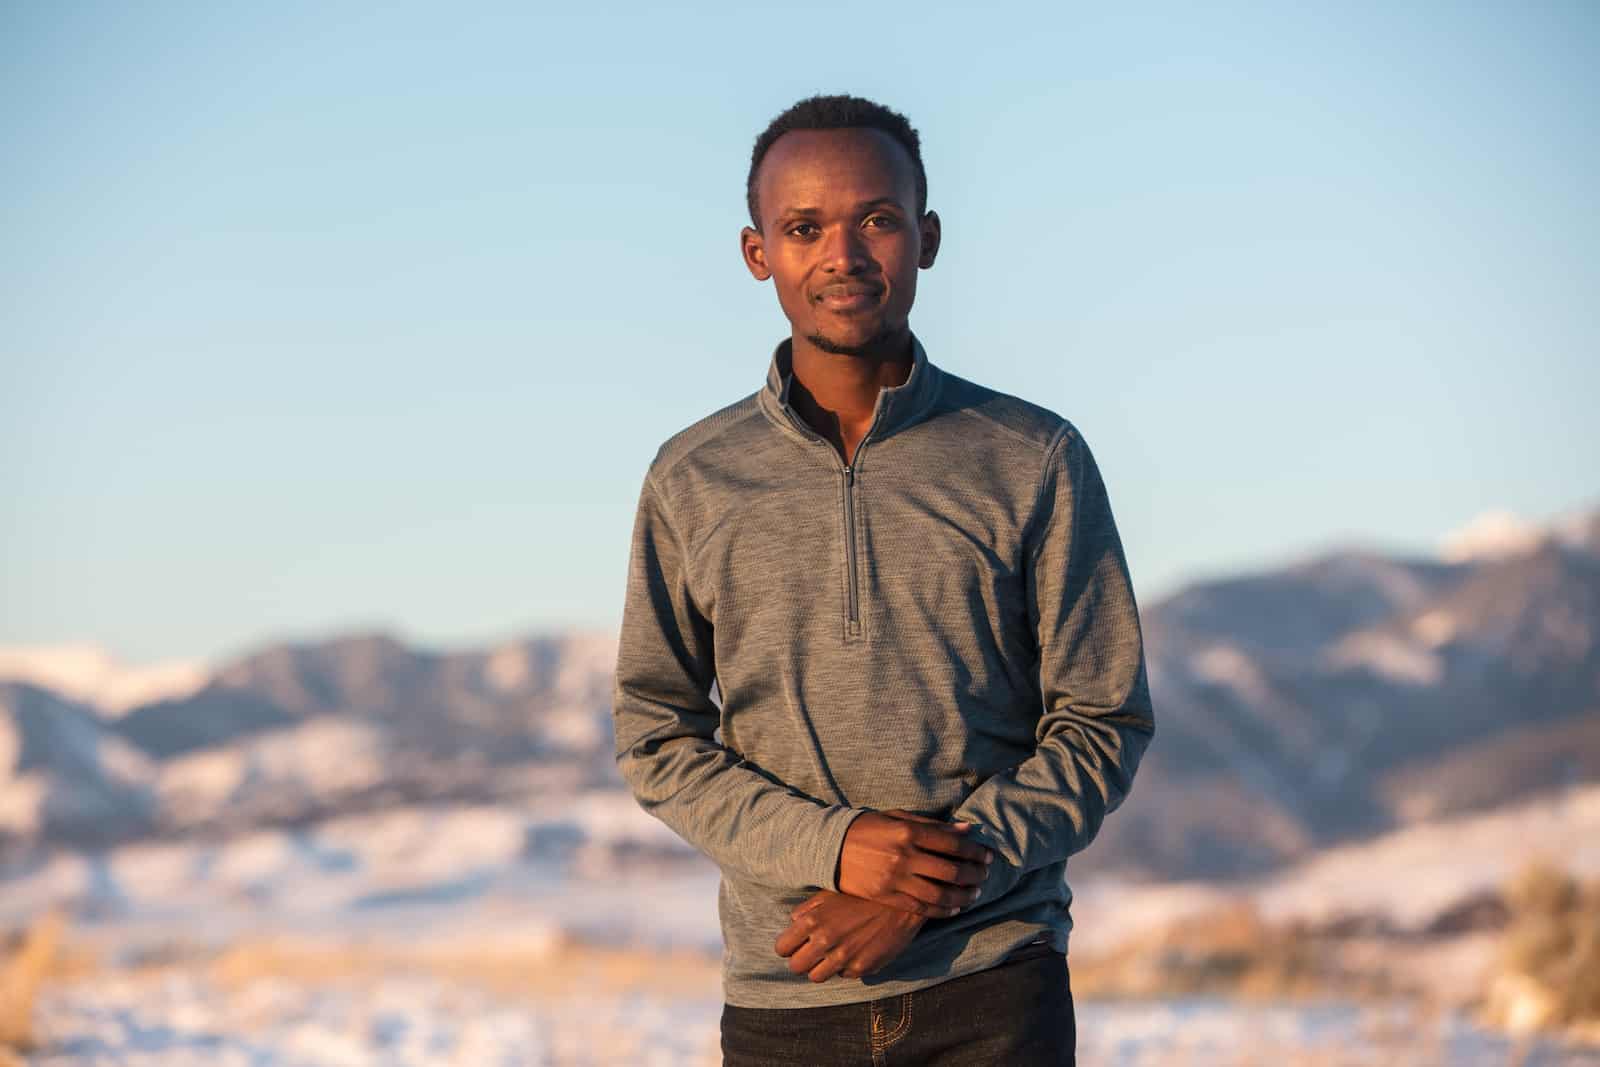 A man stands in a gray shirt in front of snowy hills, smiling at the camera.